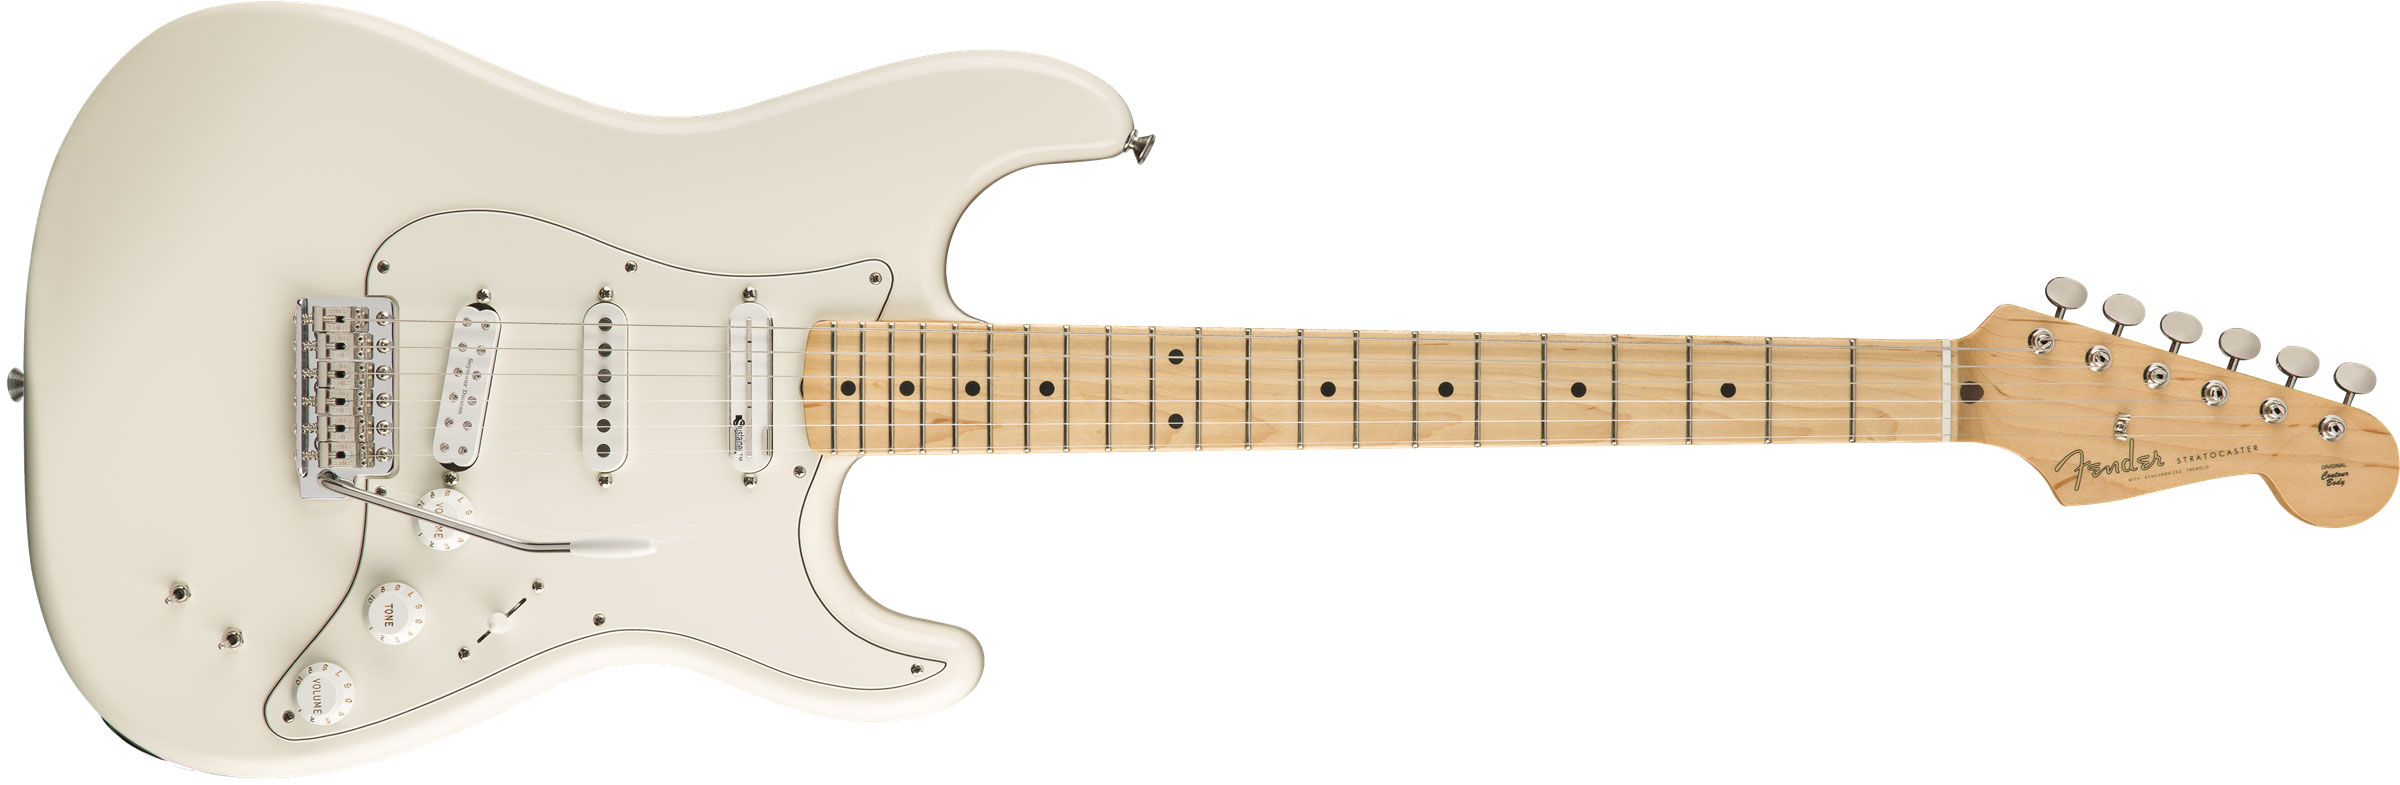 GUITARRA FENDER SIG SERIES ED O'BRIEN STRATOCASTER 014-0192-305 OLYMPIC WHITE